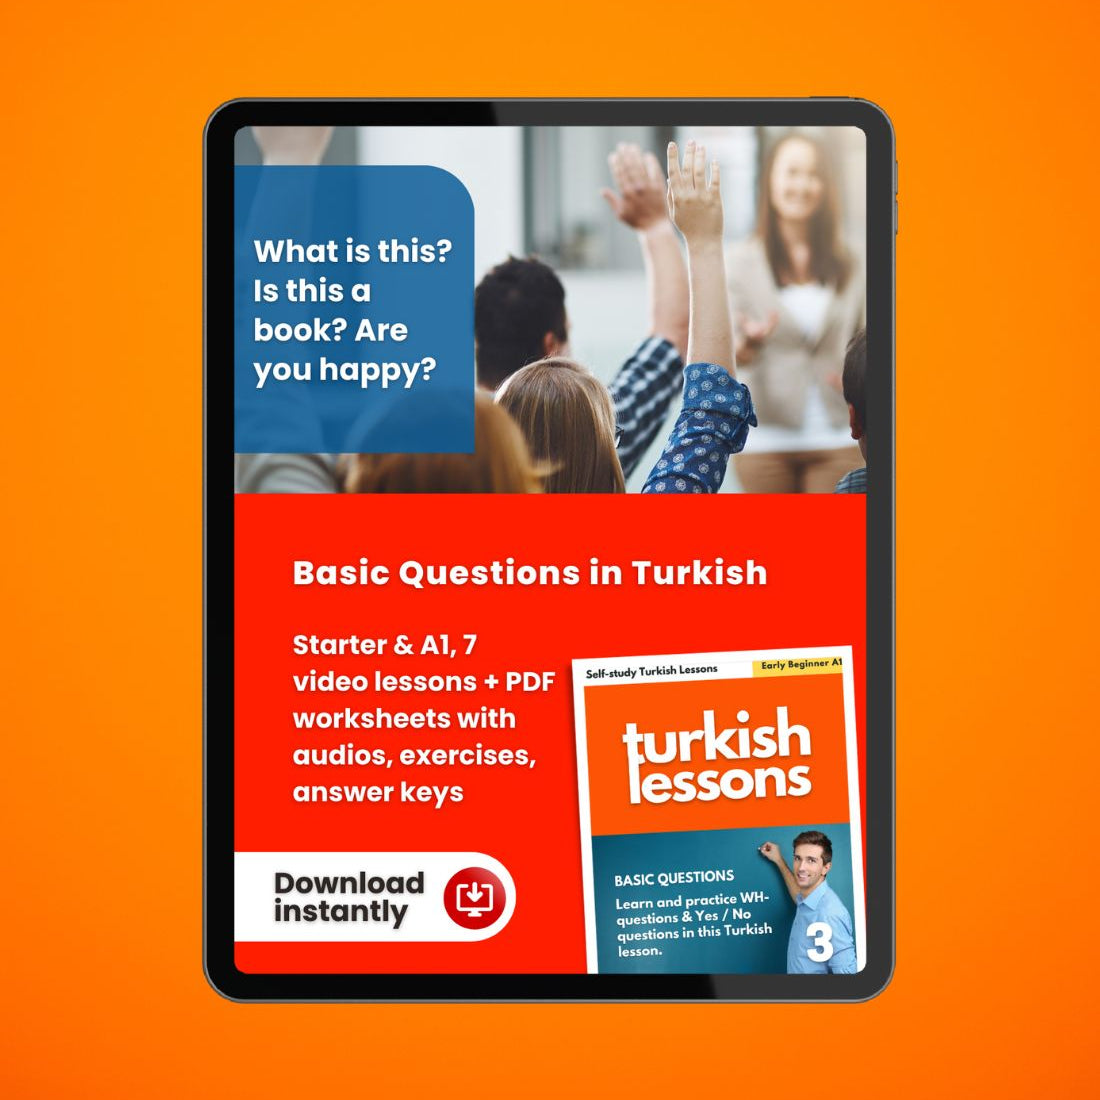 turkish lessons a1 - basic questions in turkish language